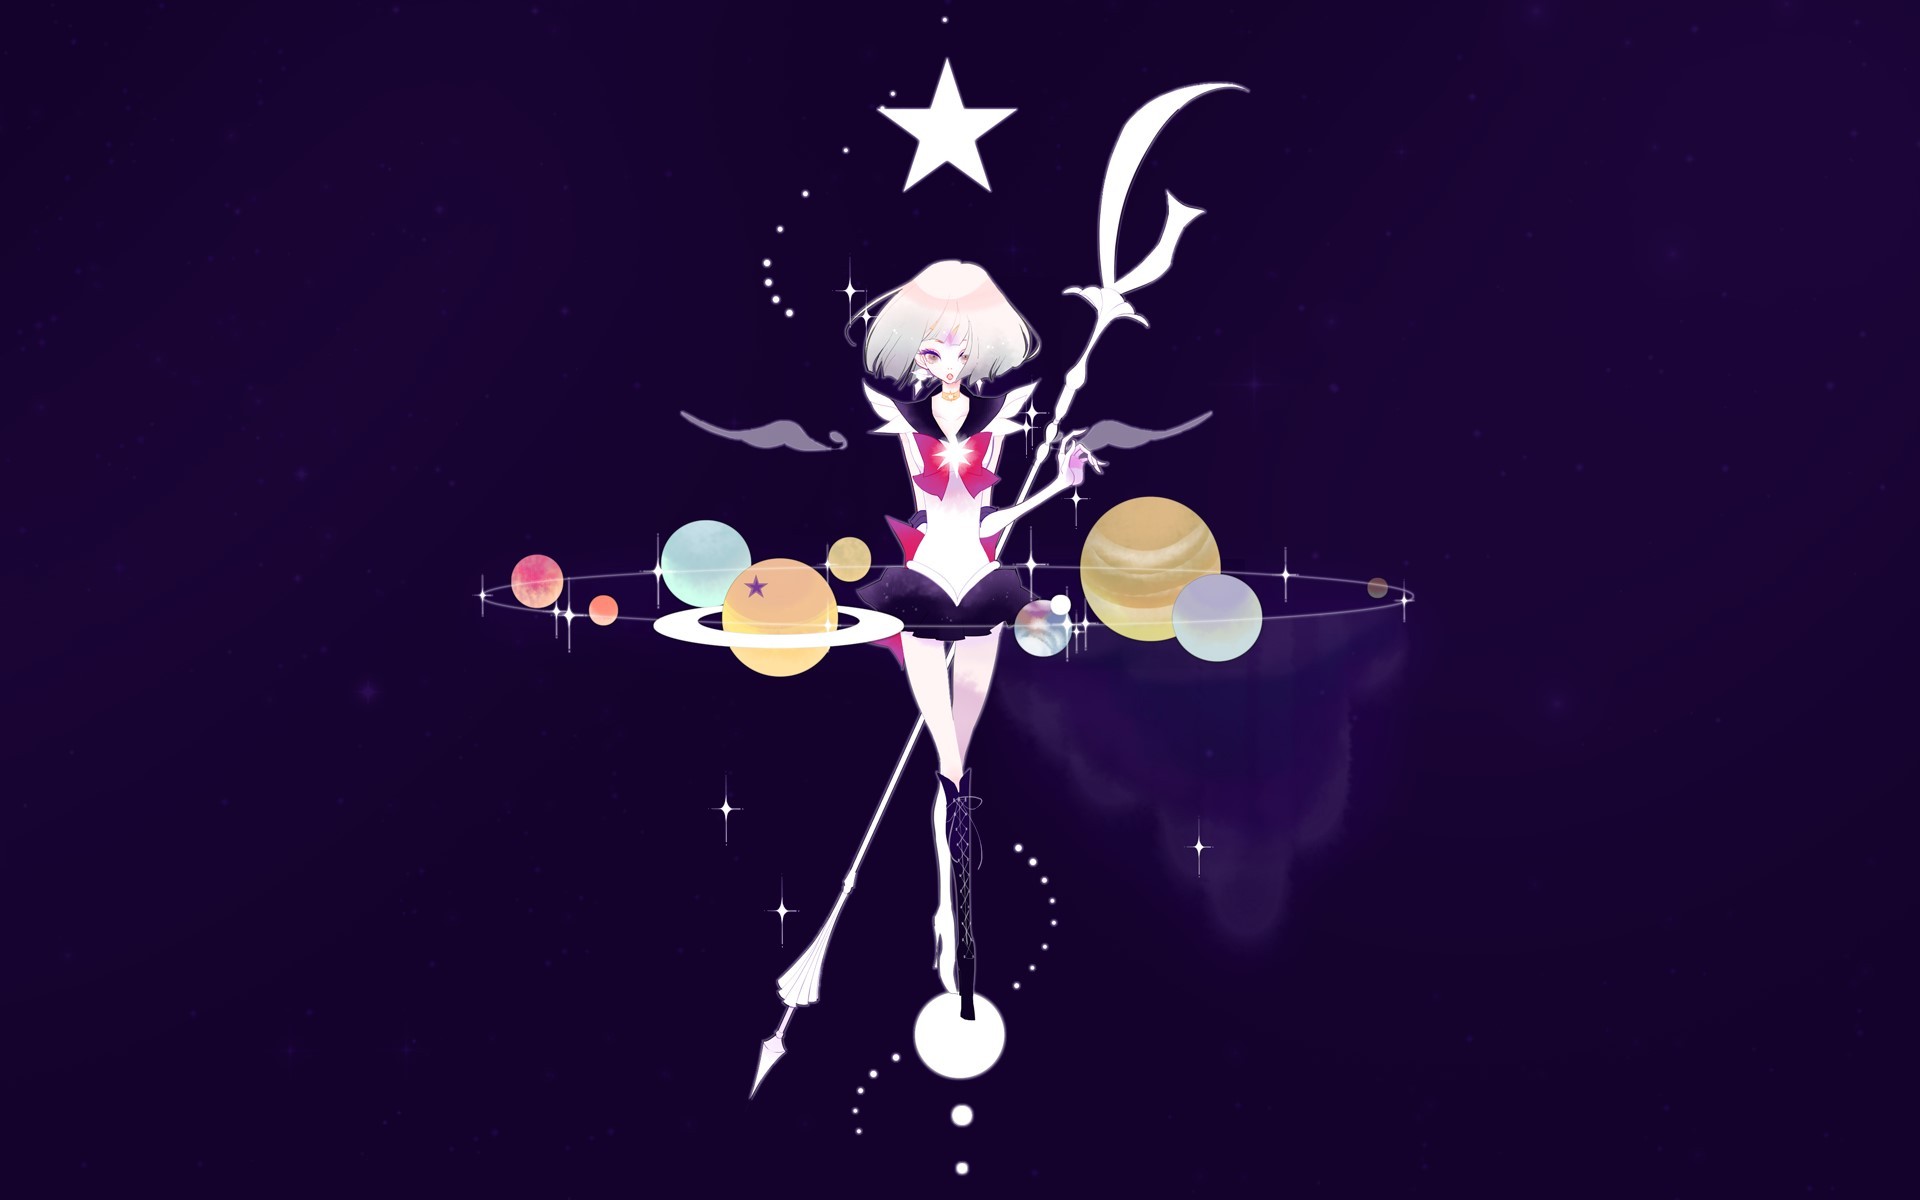 Sailor Moon Background Image - KoLPaPer - Awesome Free HD Wallpapers